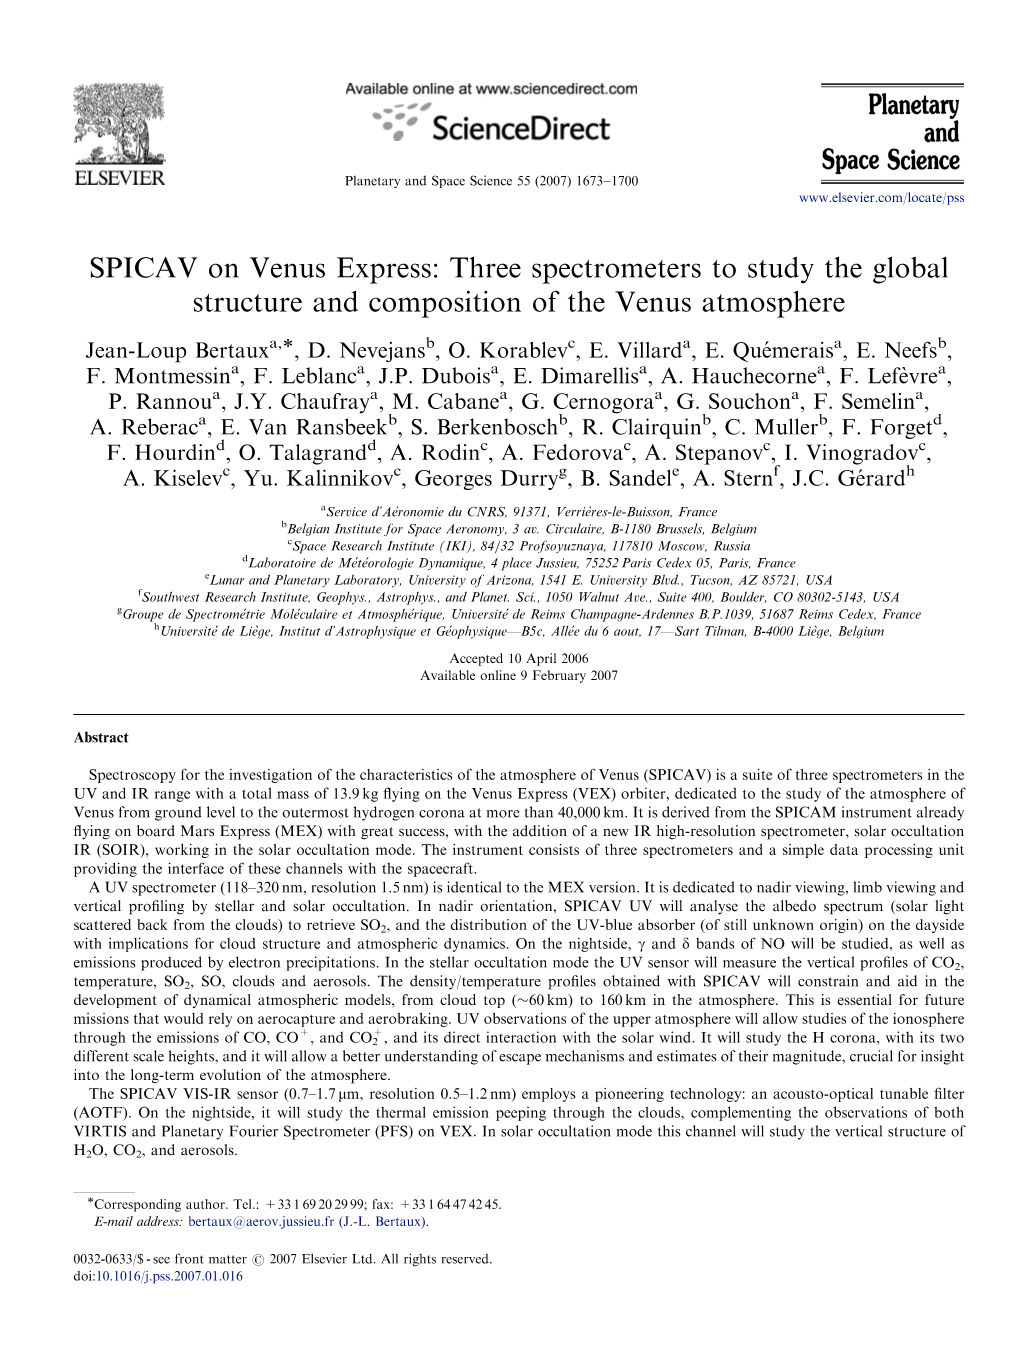 SPICAV on Venus Express: Three Spectrometers to Study the Global Structure and Composition of the Venus Atmosphere